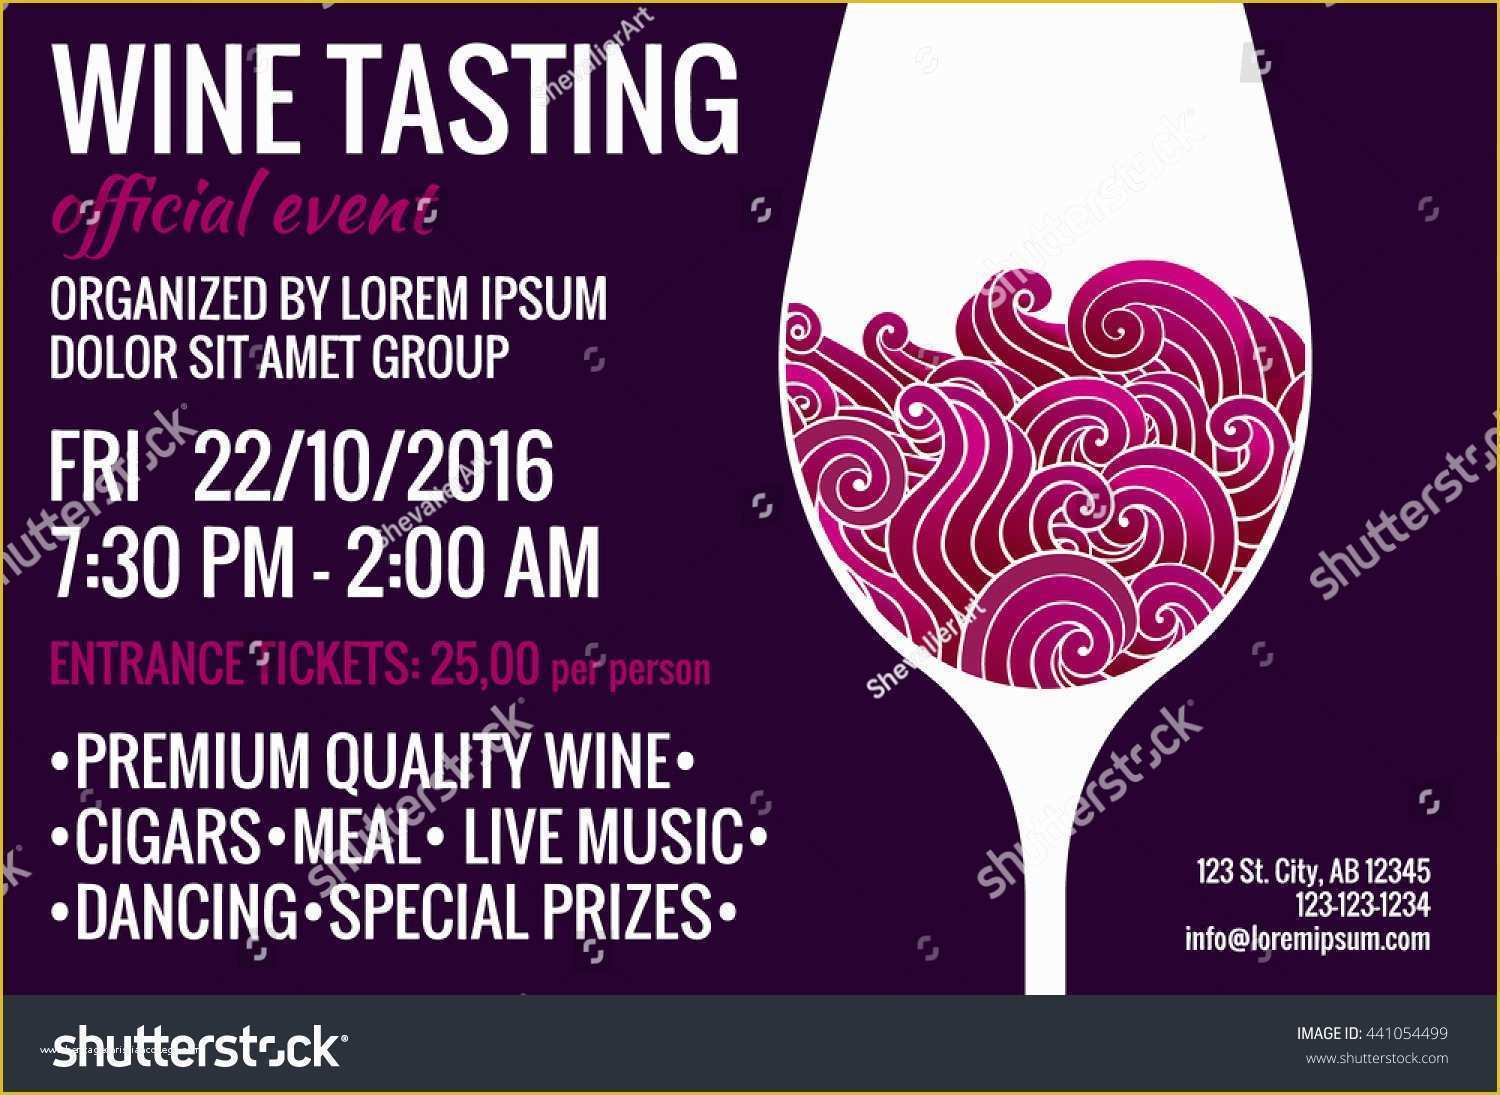 Free Wine Tasting Flyer Template Of Wine Tasting Party Flyer Stylized Glass Stock Vector